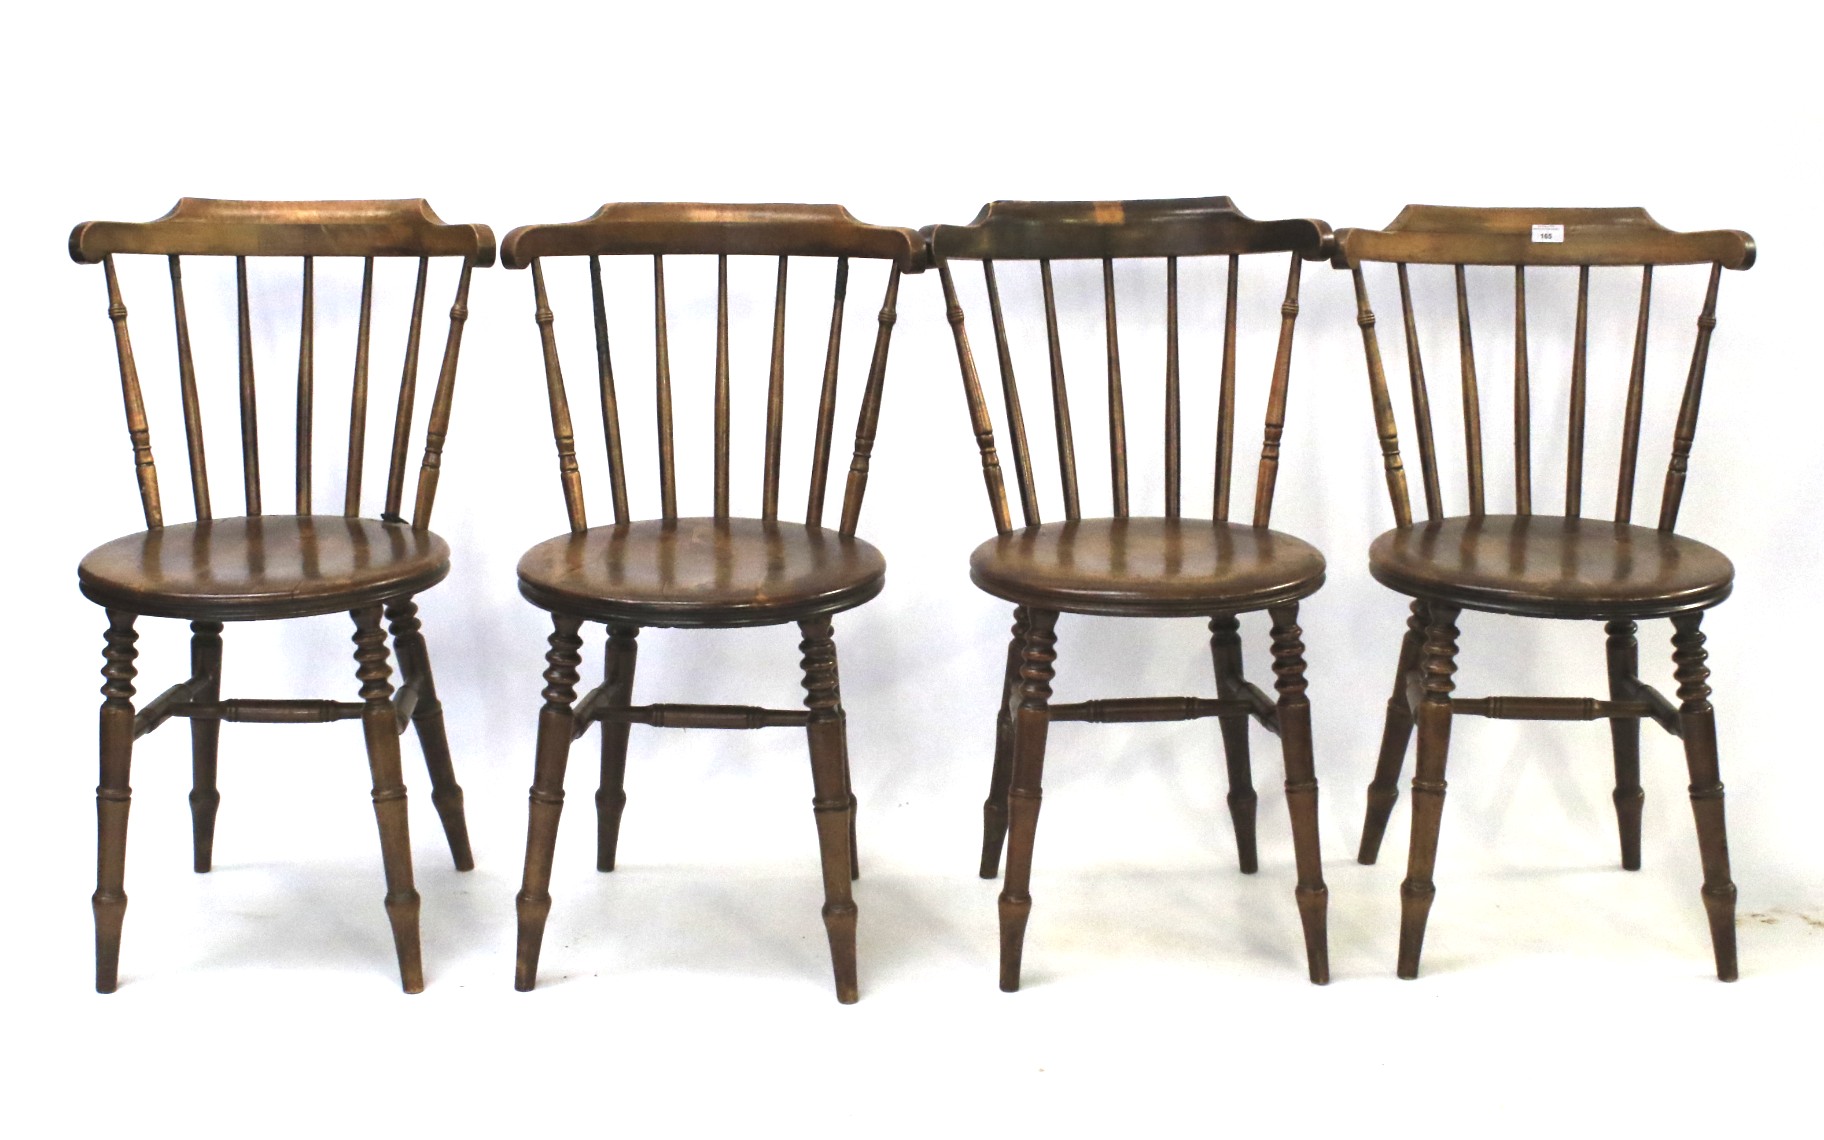 A set of four mahogany chairs and together with a single chair.